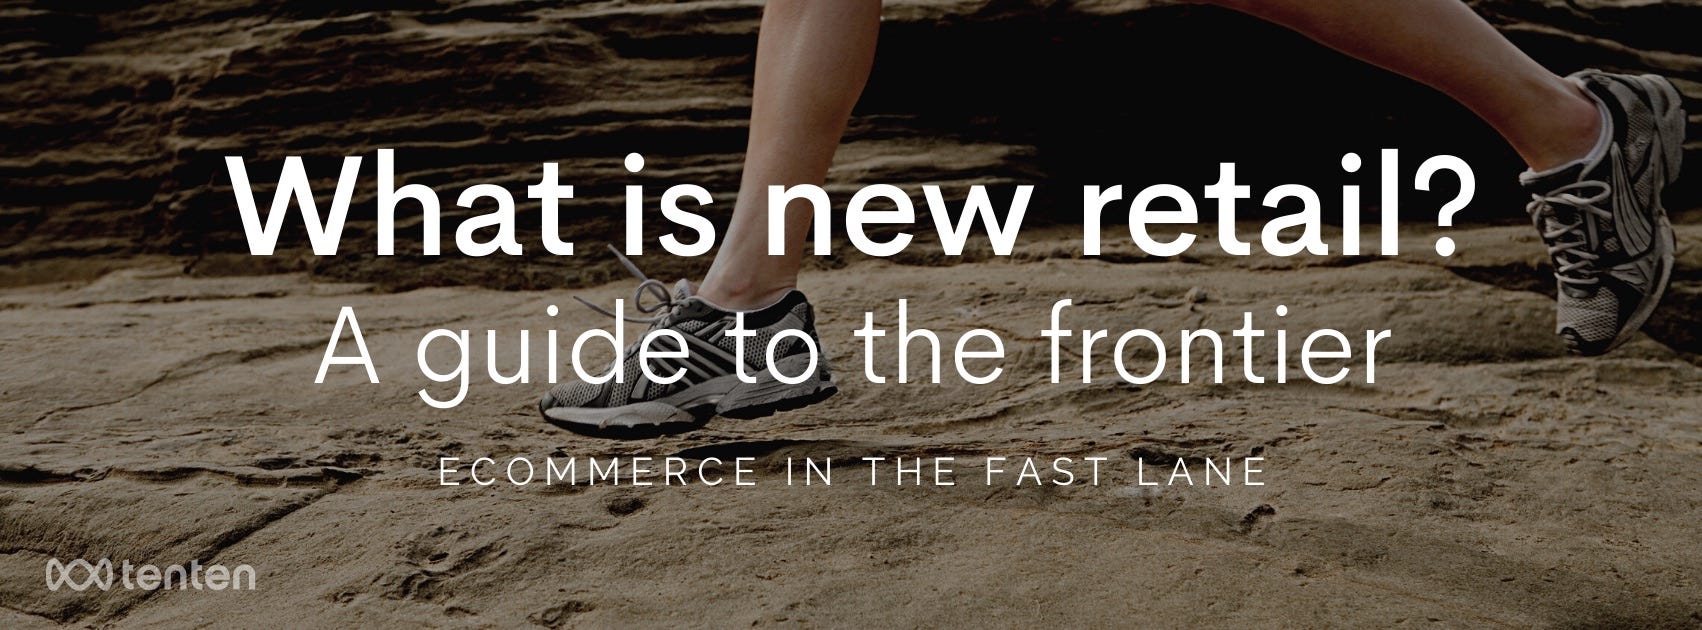 What is new retail? A guide to the frontier